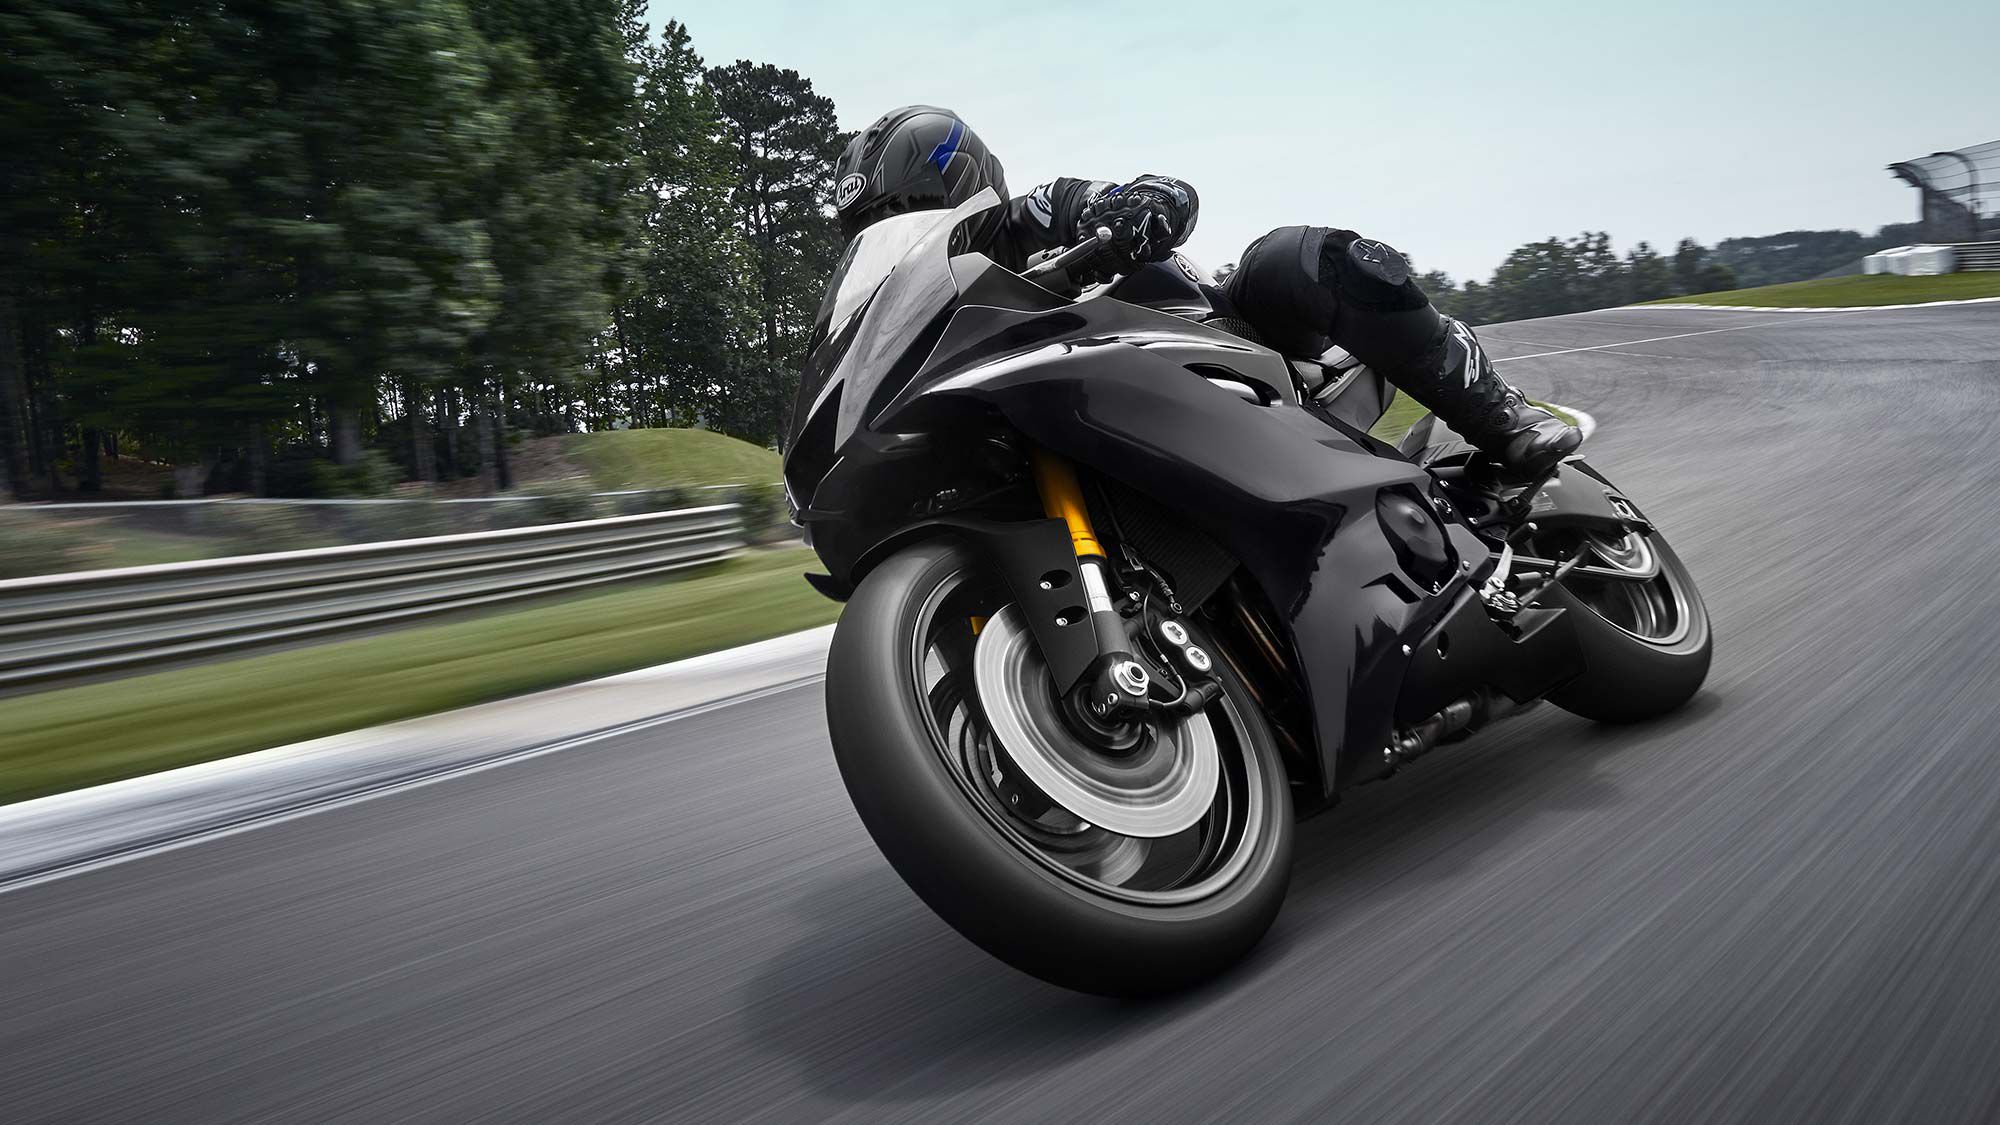 Yamaha Motor will continue to offer new YZF-R6 sportbikes for trackday riders and racers.